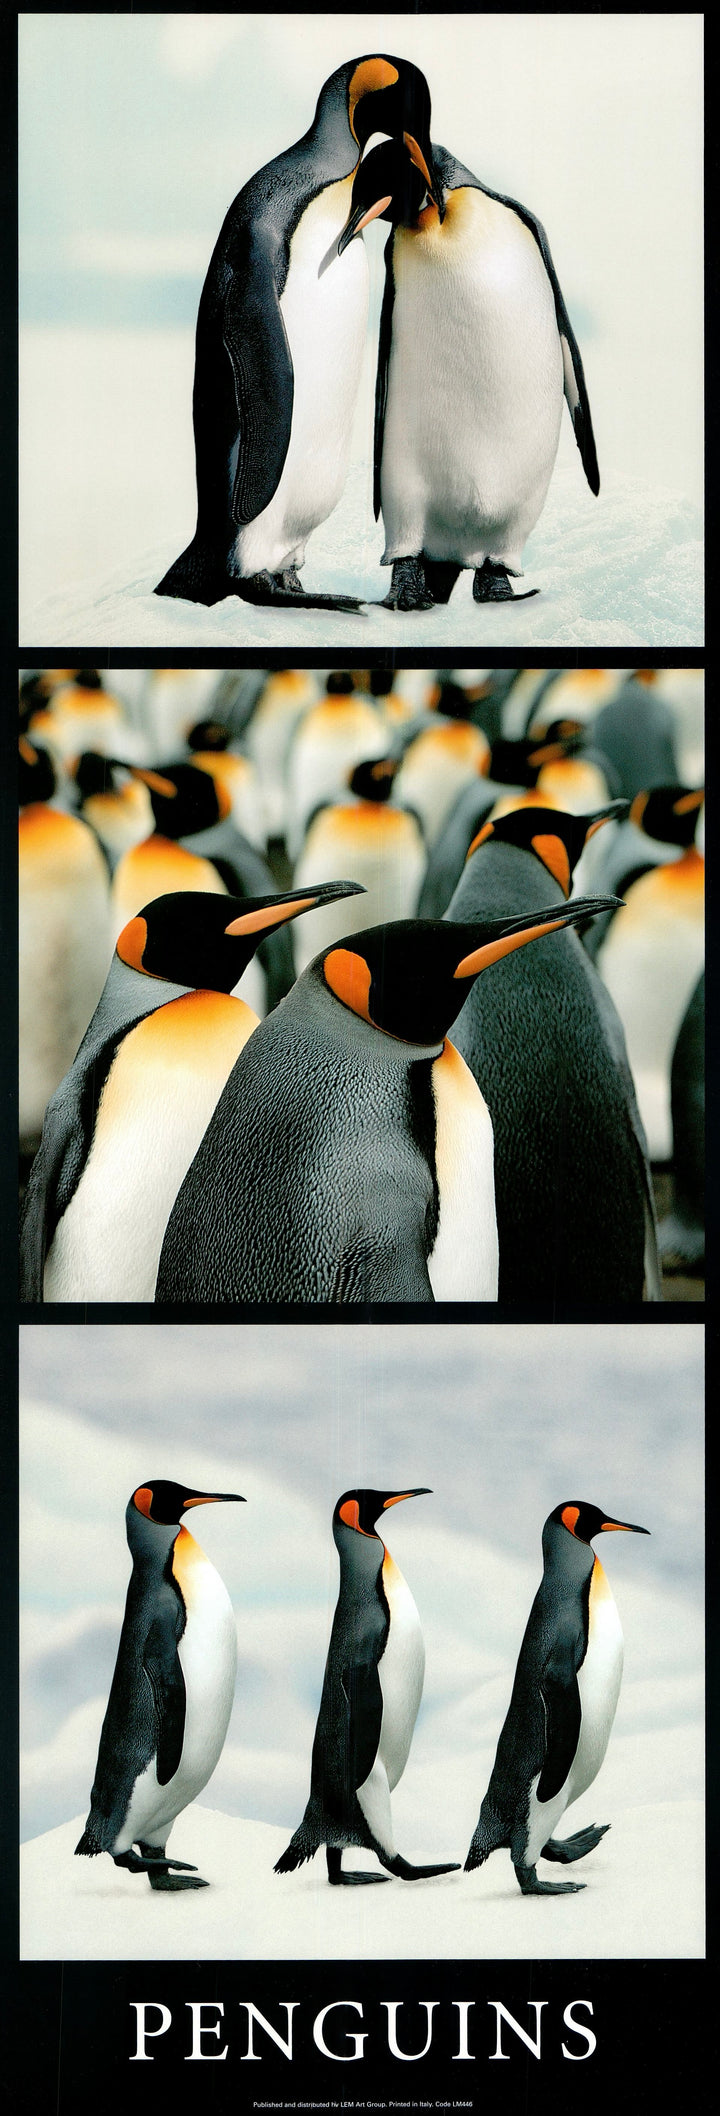 Penguins by Unknown / Annonyme - 13 X 38 Inches (Art Print)